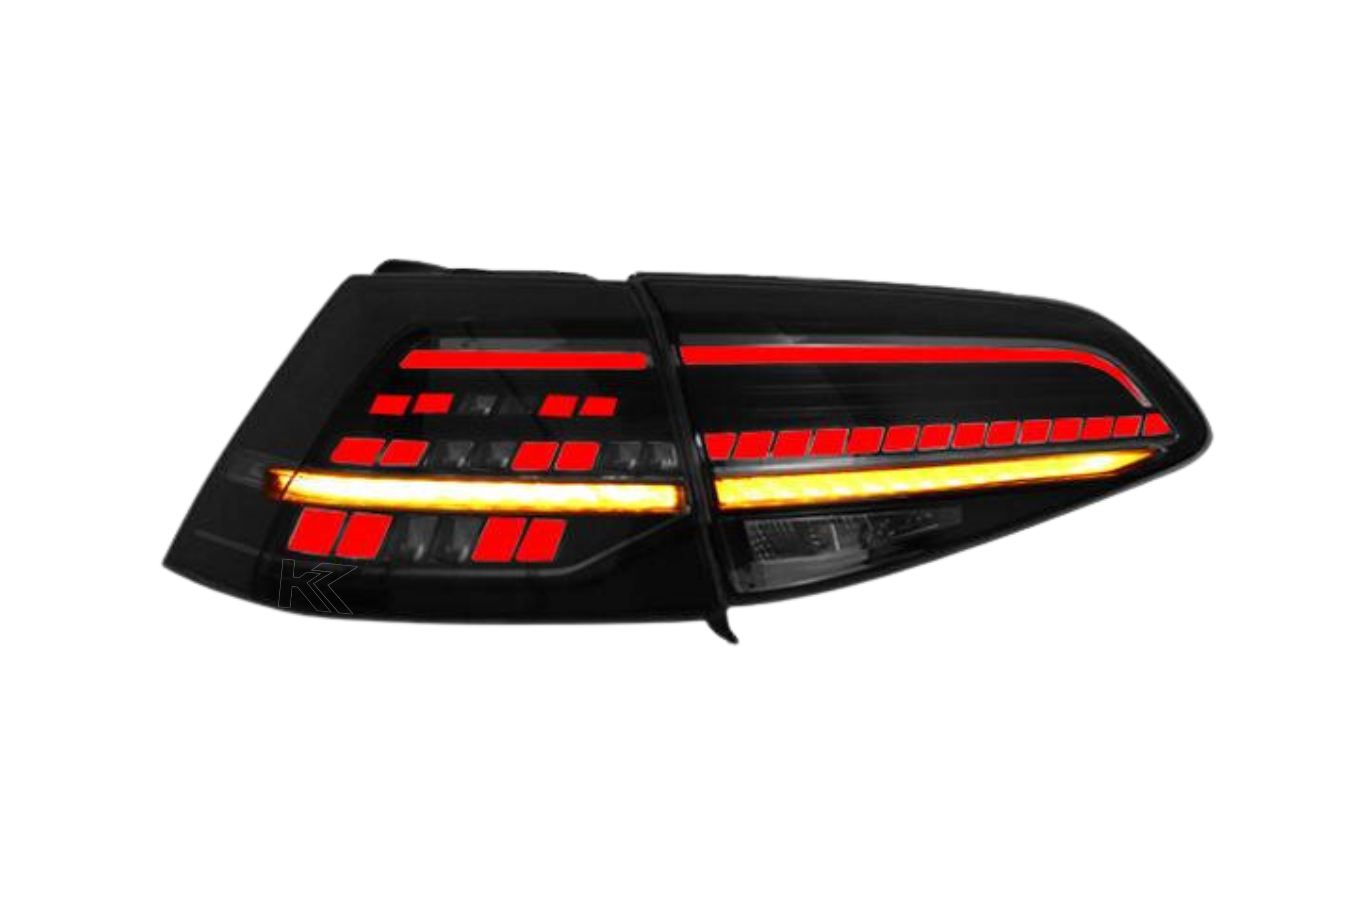 VW MK7 Golf 7 and Golf MK7 7.5 Euro Style Tail Lights 2013-2019